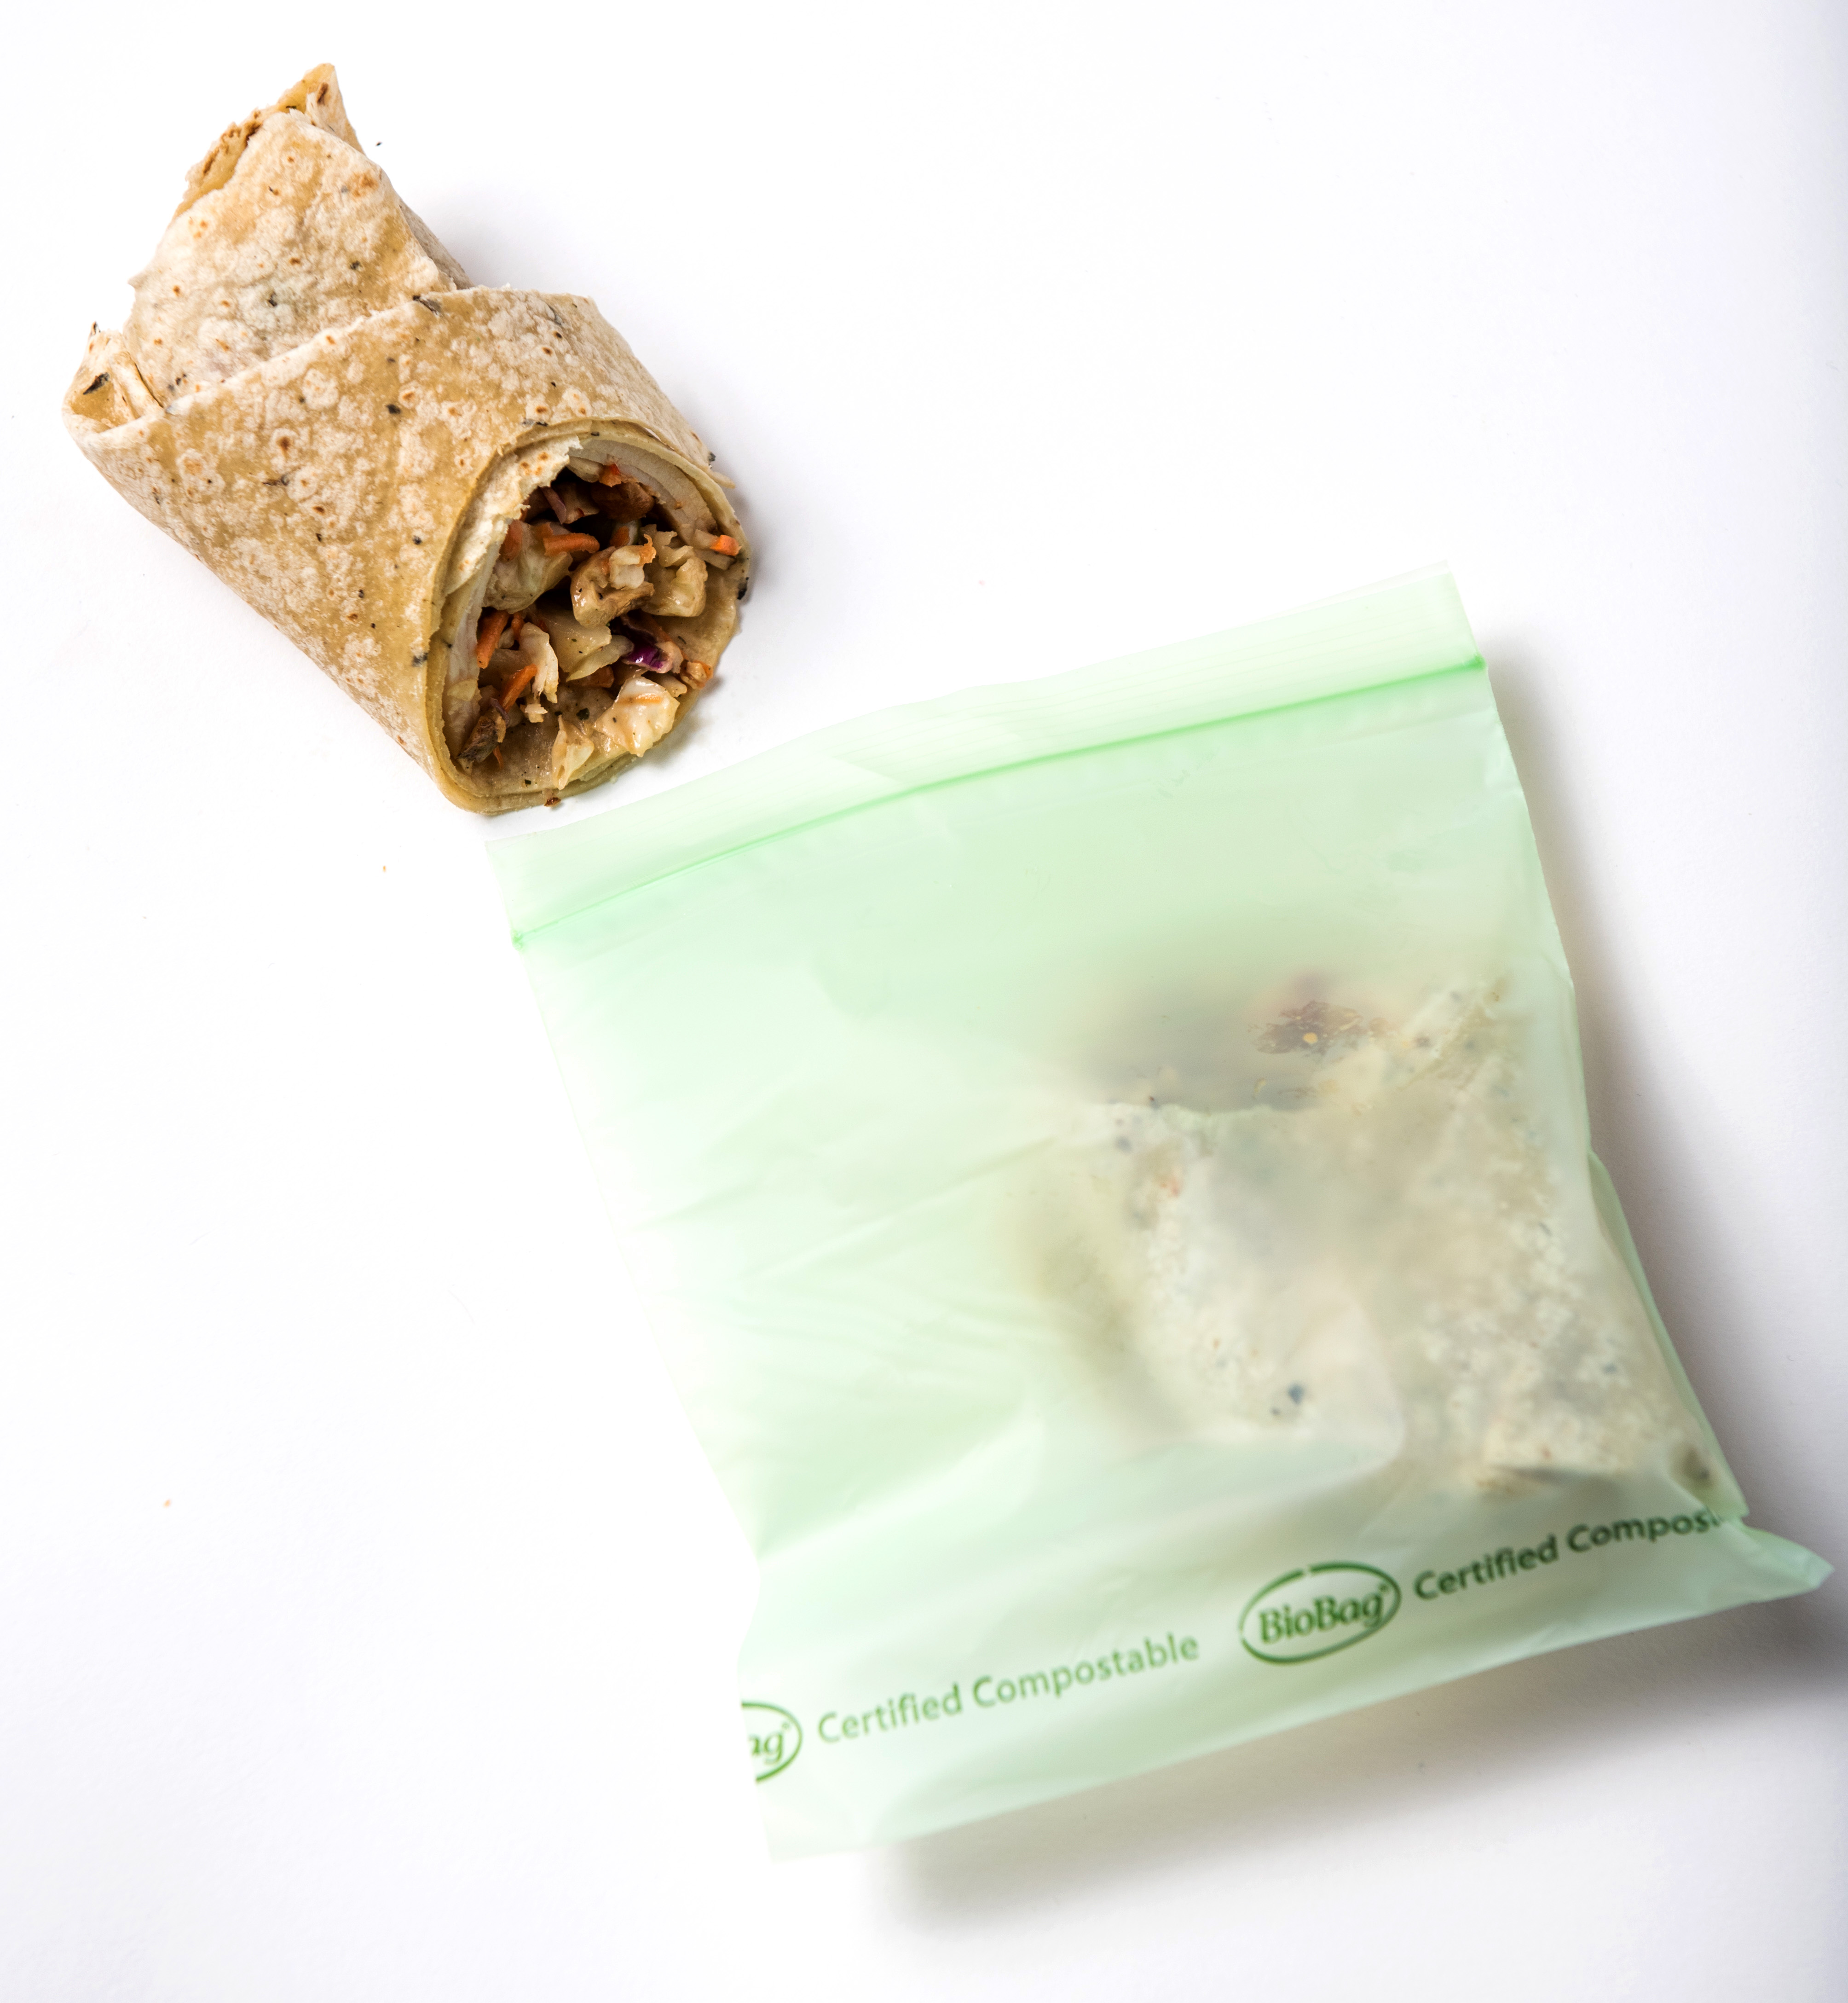 KC's Compostable Sandwich Bags & Biodegradable Snack Baggies - 7.0 x 6.7 (50ct) - Resealable & Eco-Friendly Ziplock Bags